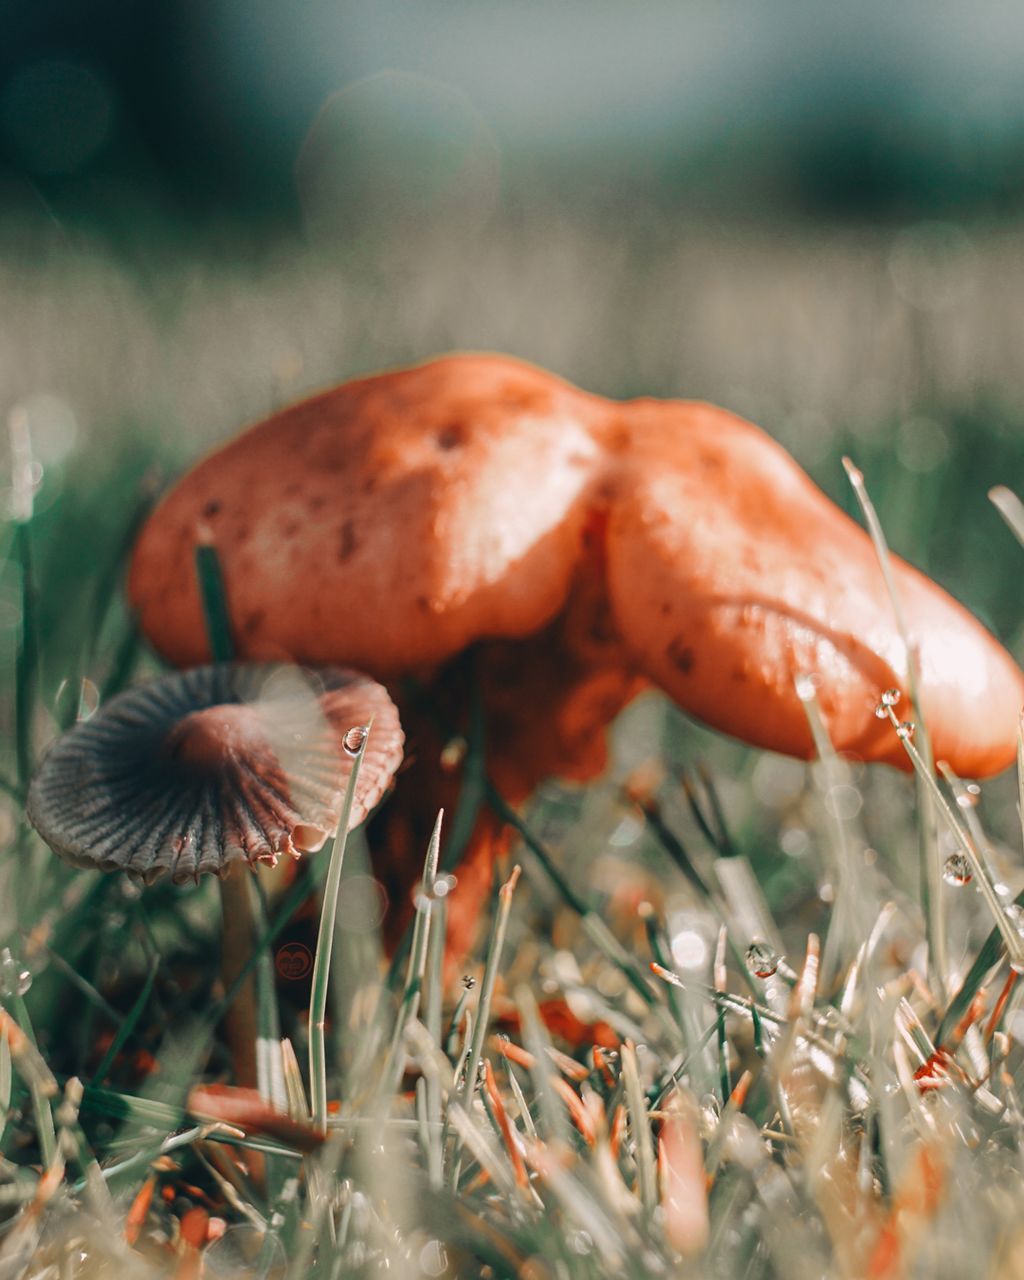 food, plant, vegetable, nature, macro photography, fungus, mushroom, close-up, growth, food and drink, land, no people, selective focus, freshness, day, outdoors, grass, autumn, beauty in nature, forest